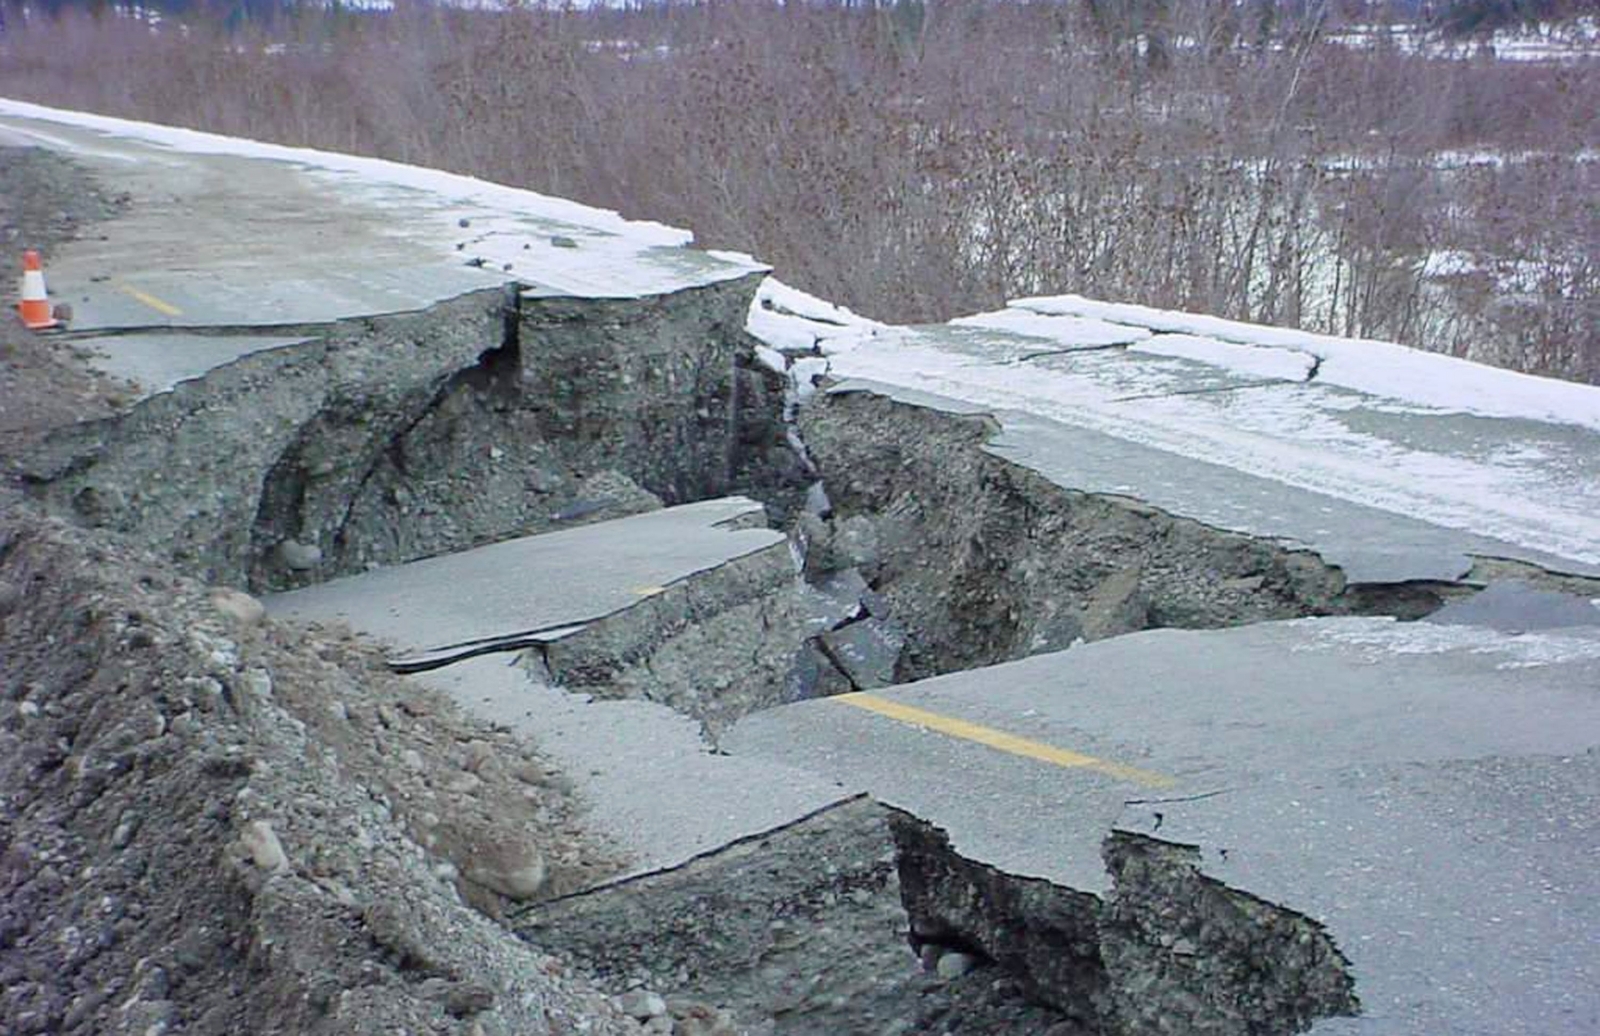 Alaska is at high tsunami risk due to structure discovered beneath sea floor1600 x 1036